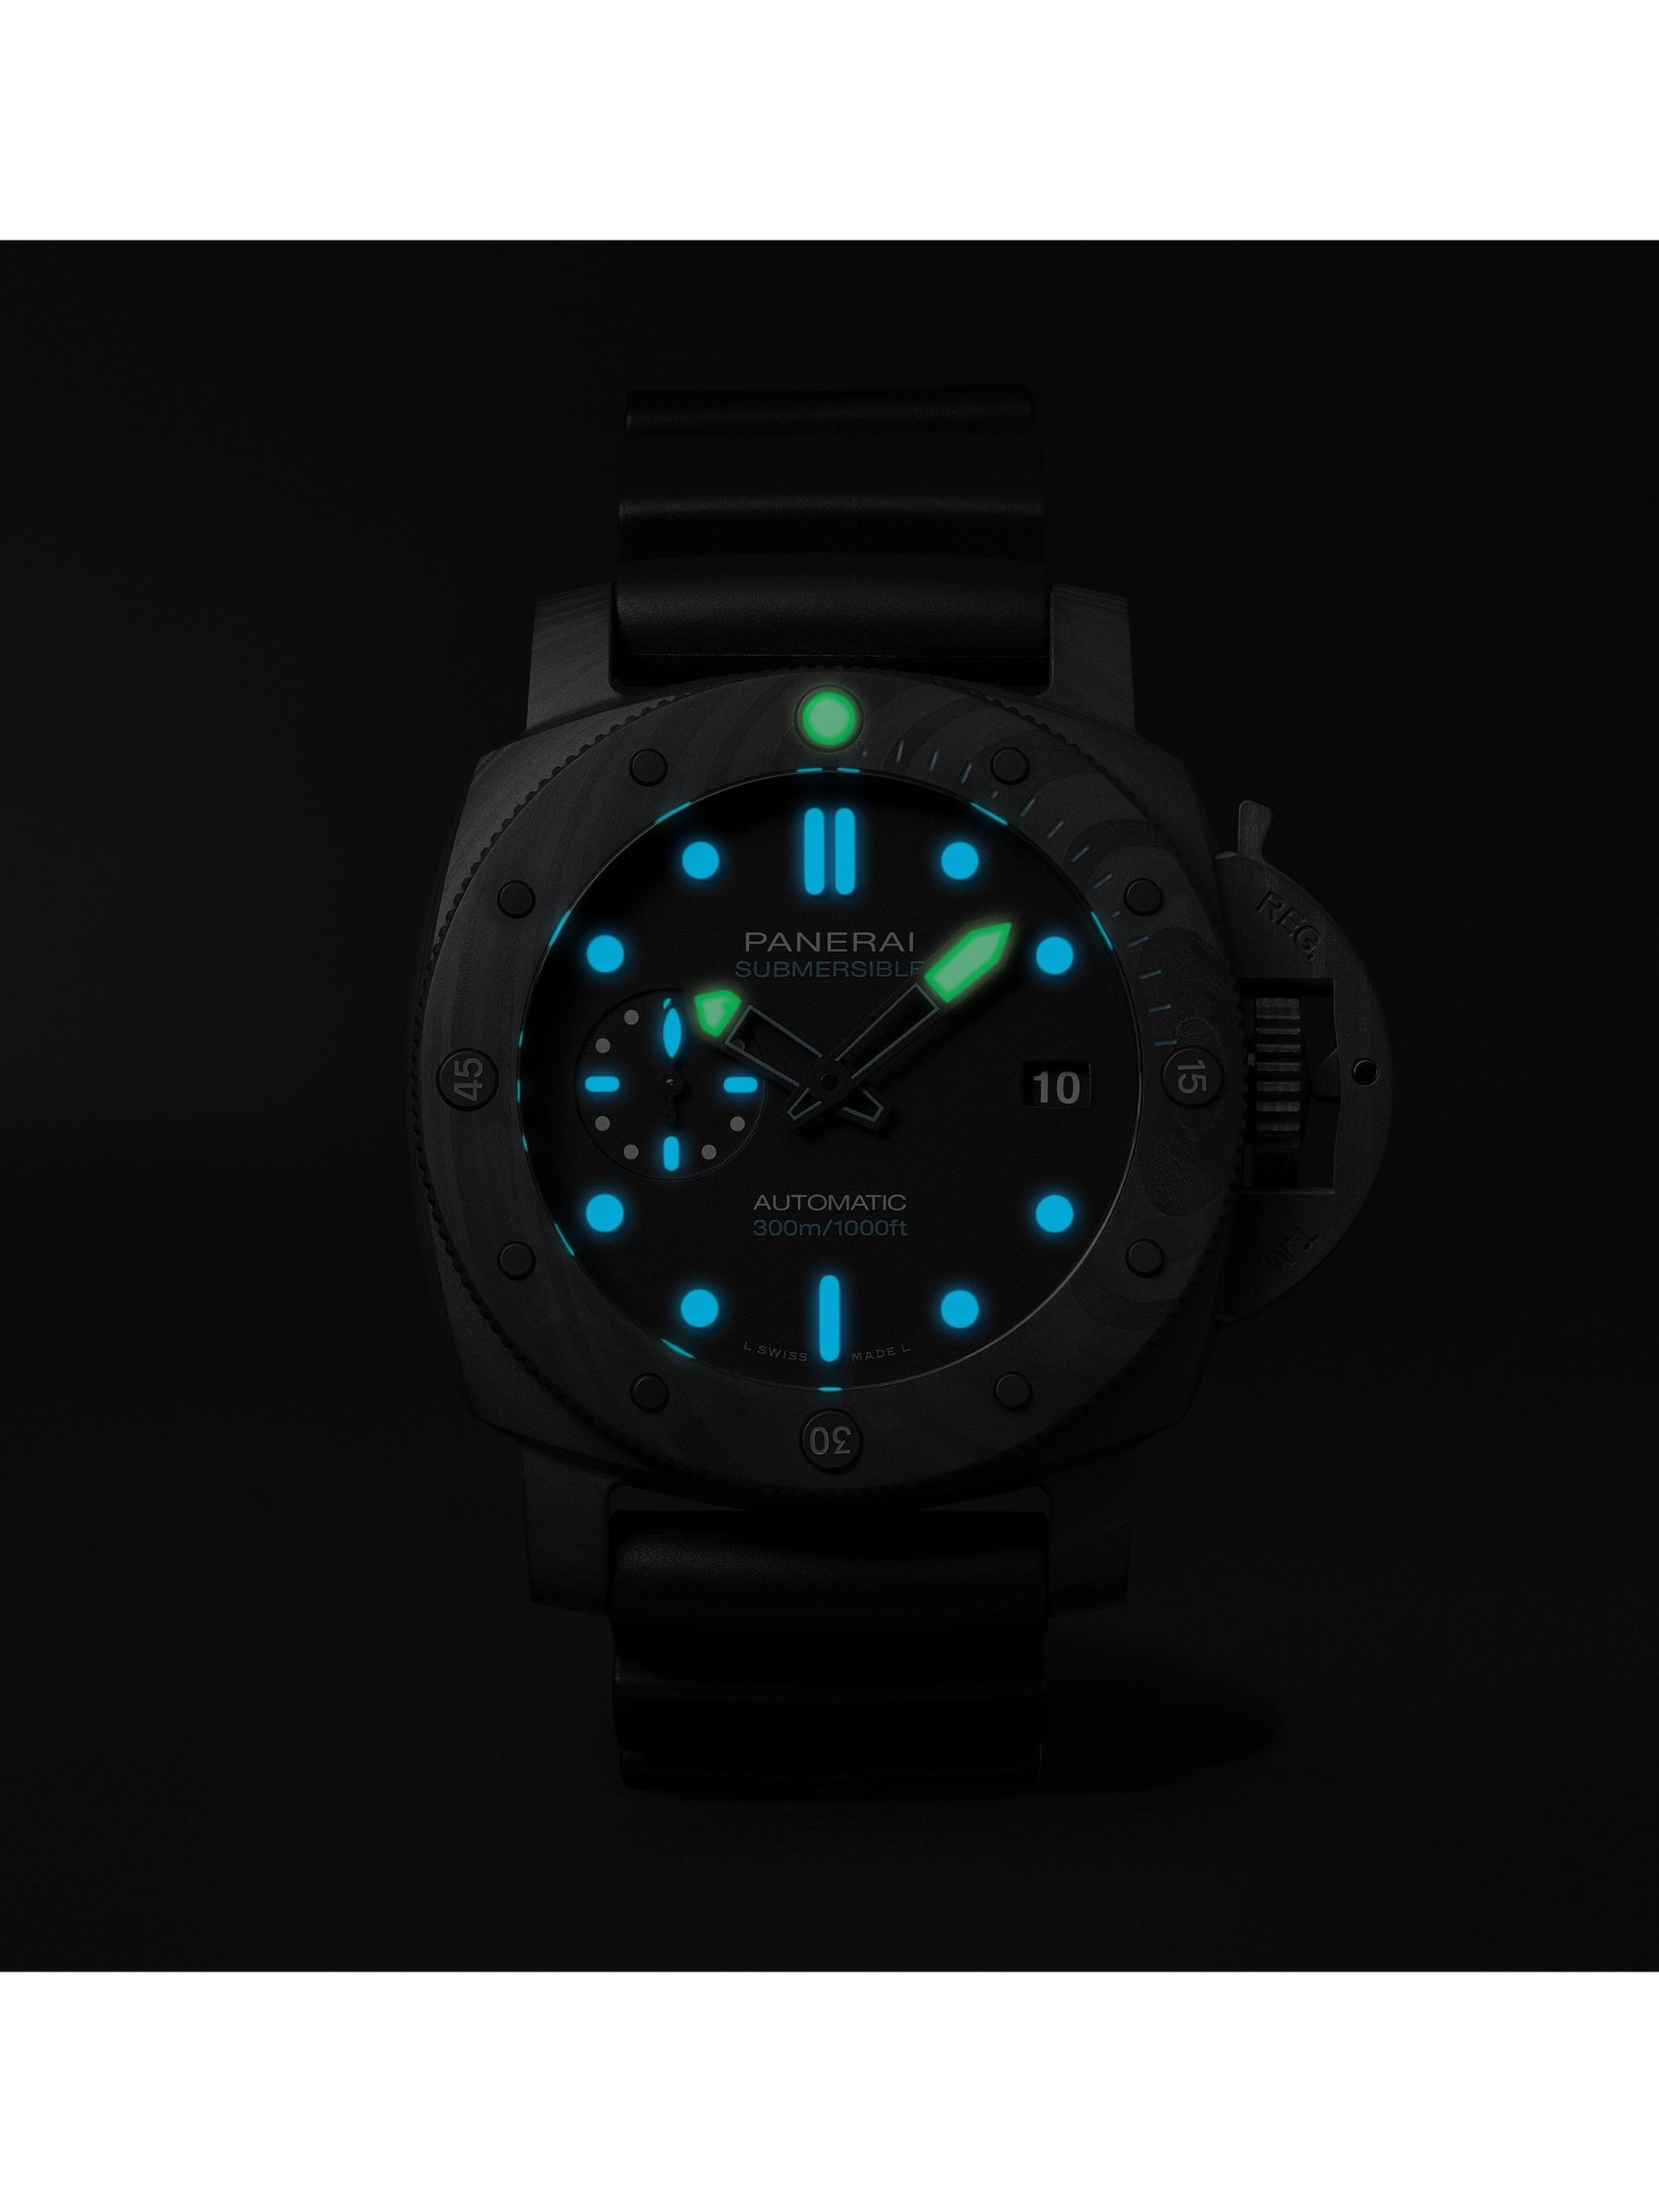 PANERAI Submersible Automatic 42mm Carbotech and Rubber Watch, Ref. No. PAM00960